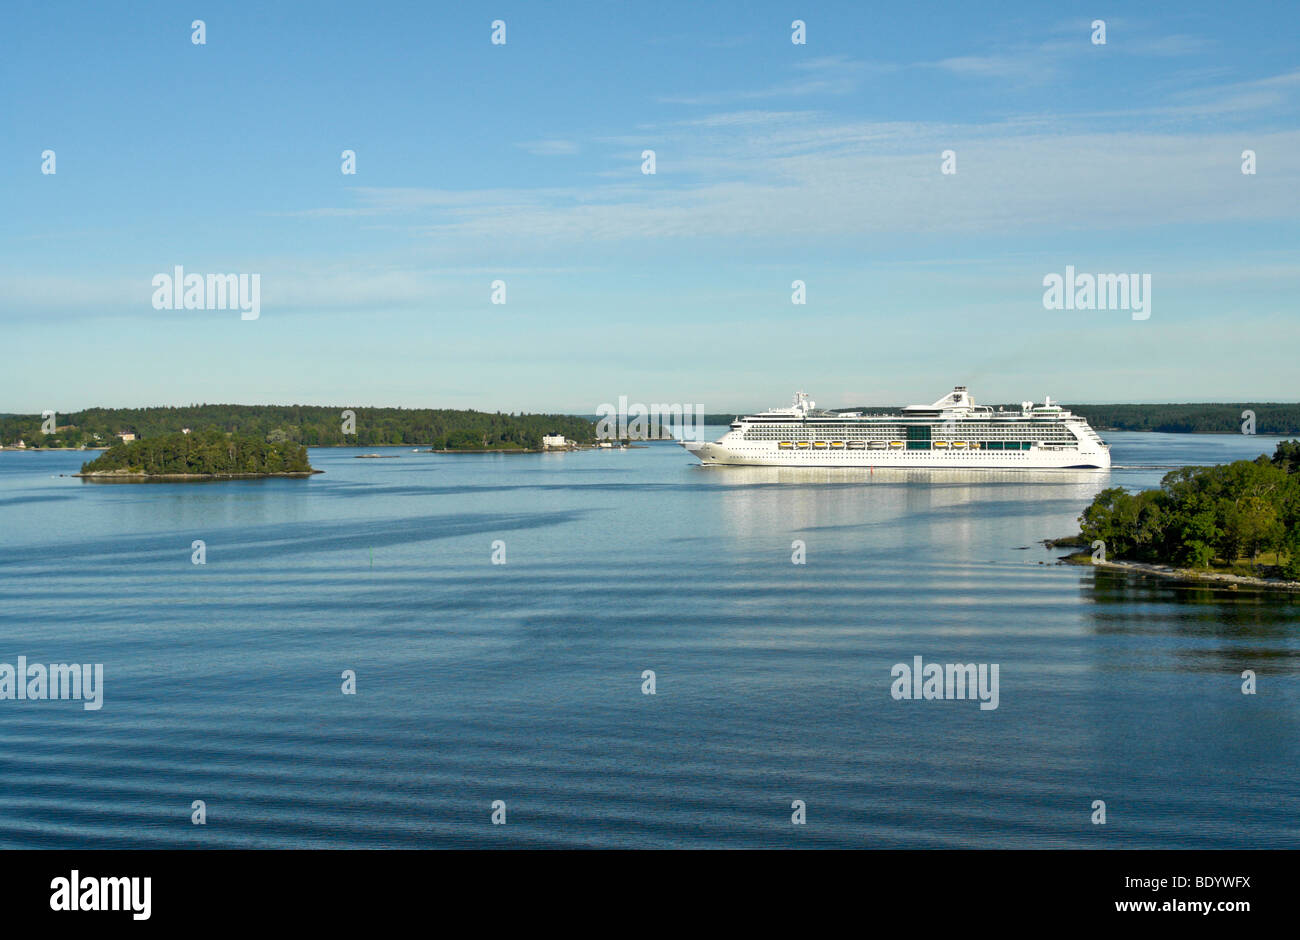 The Royal Caribbean International cruise ship Jewel of the Seas sails through the archipelago as she approaches Stockholm Sweden Stock Photo